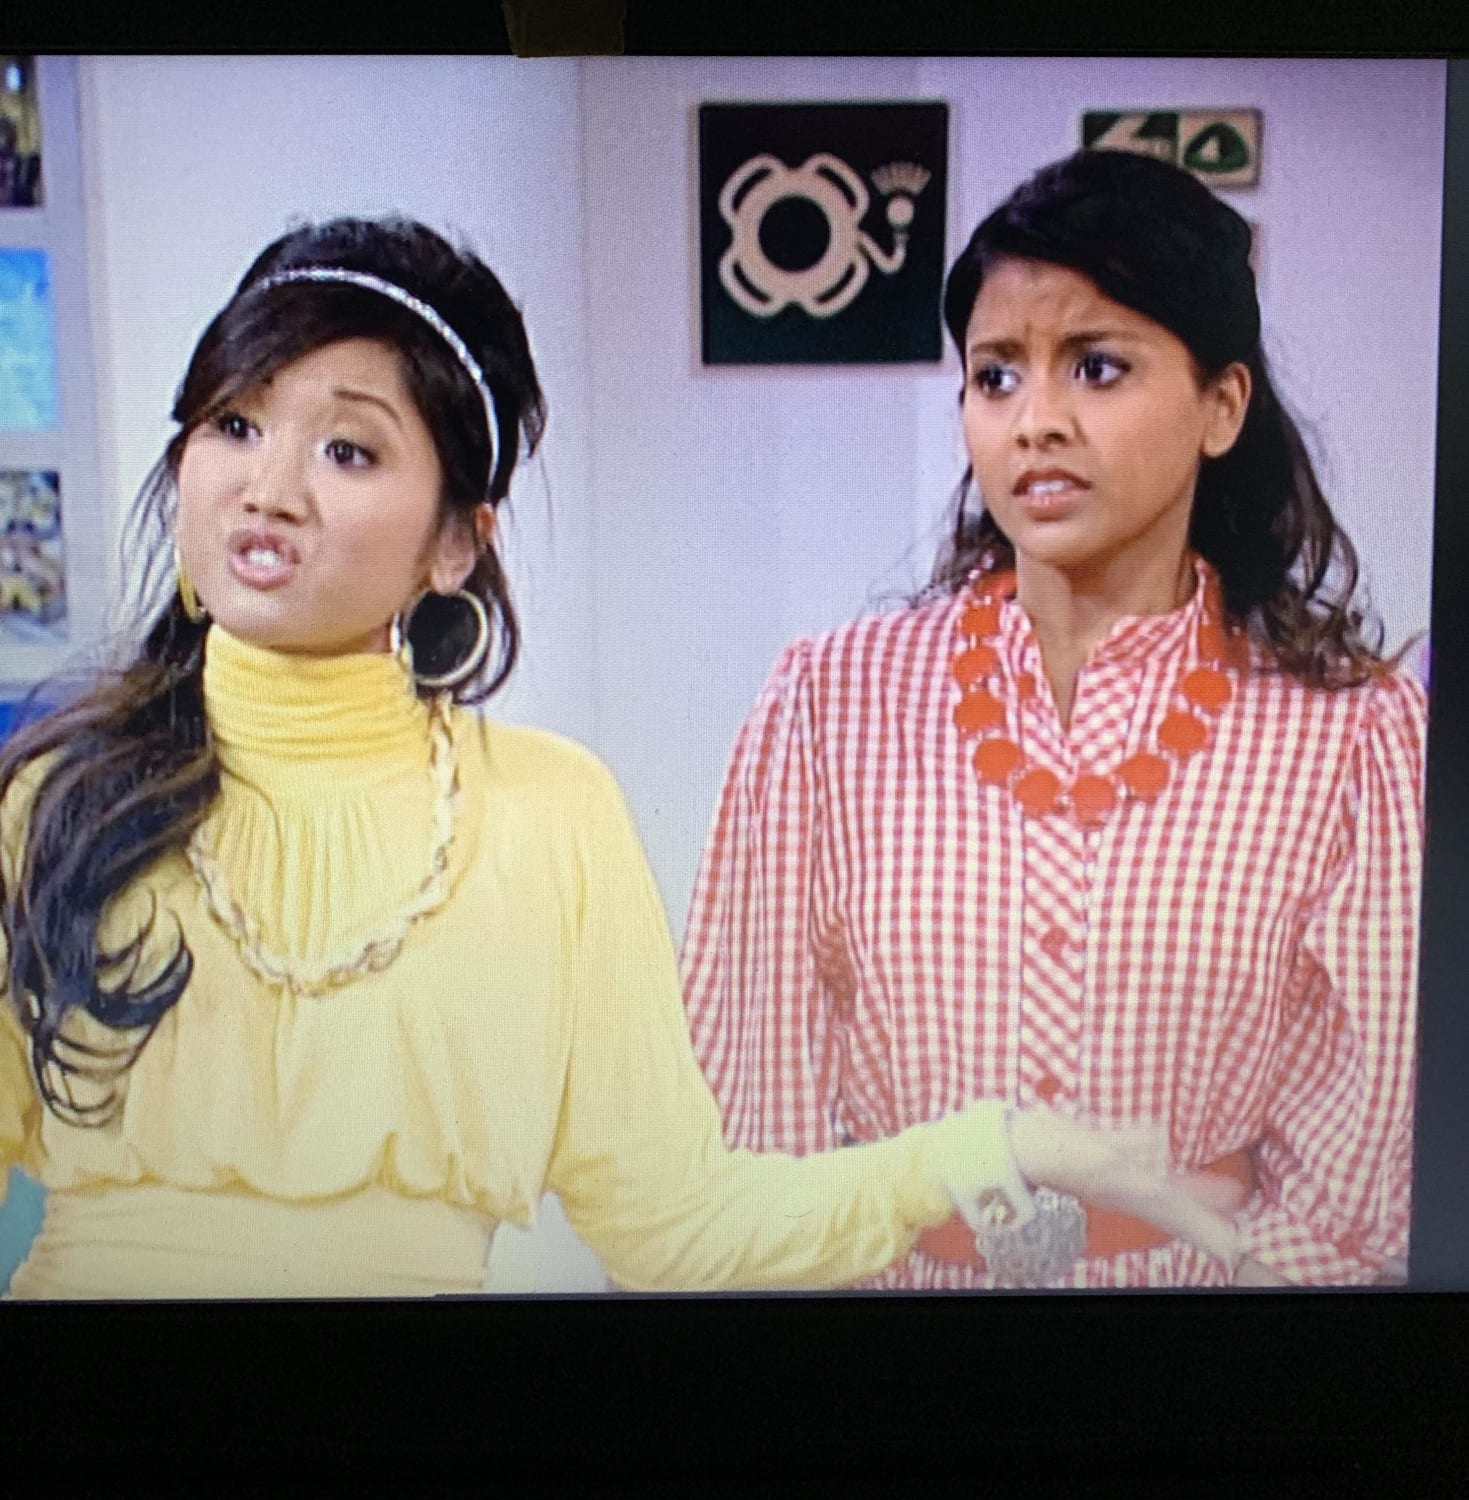 Any old Disney Channel fans here? I thought I recognized Vicky from somewhere until I rewatched Suite Life on Deck